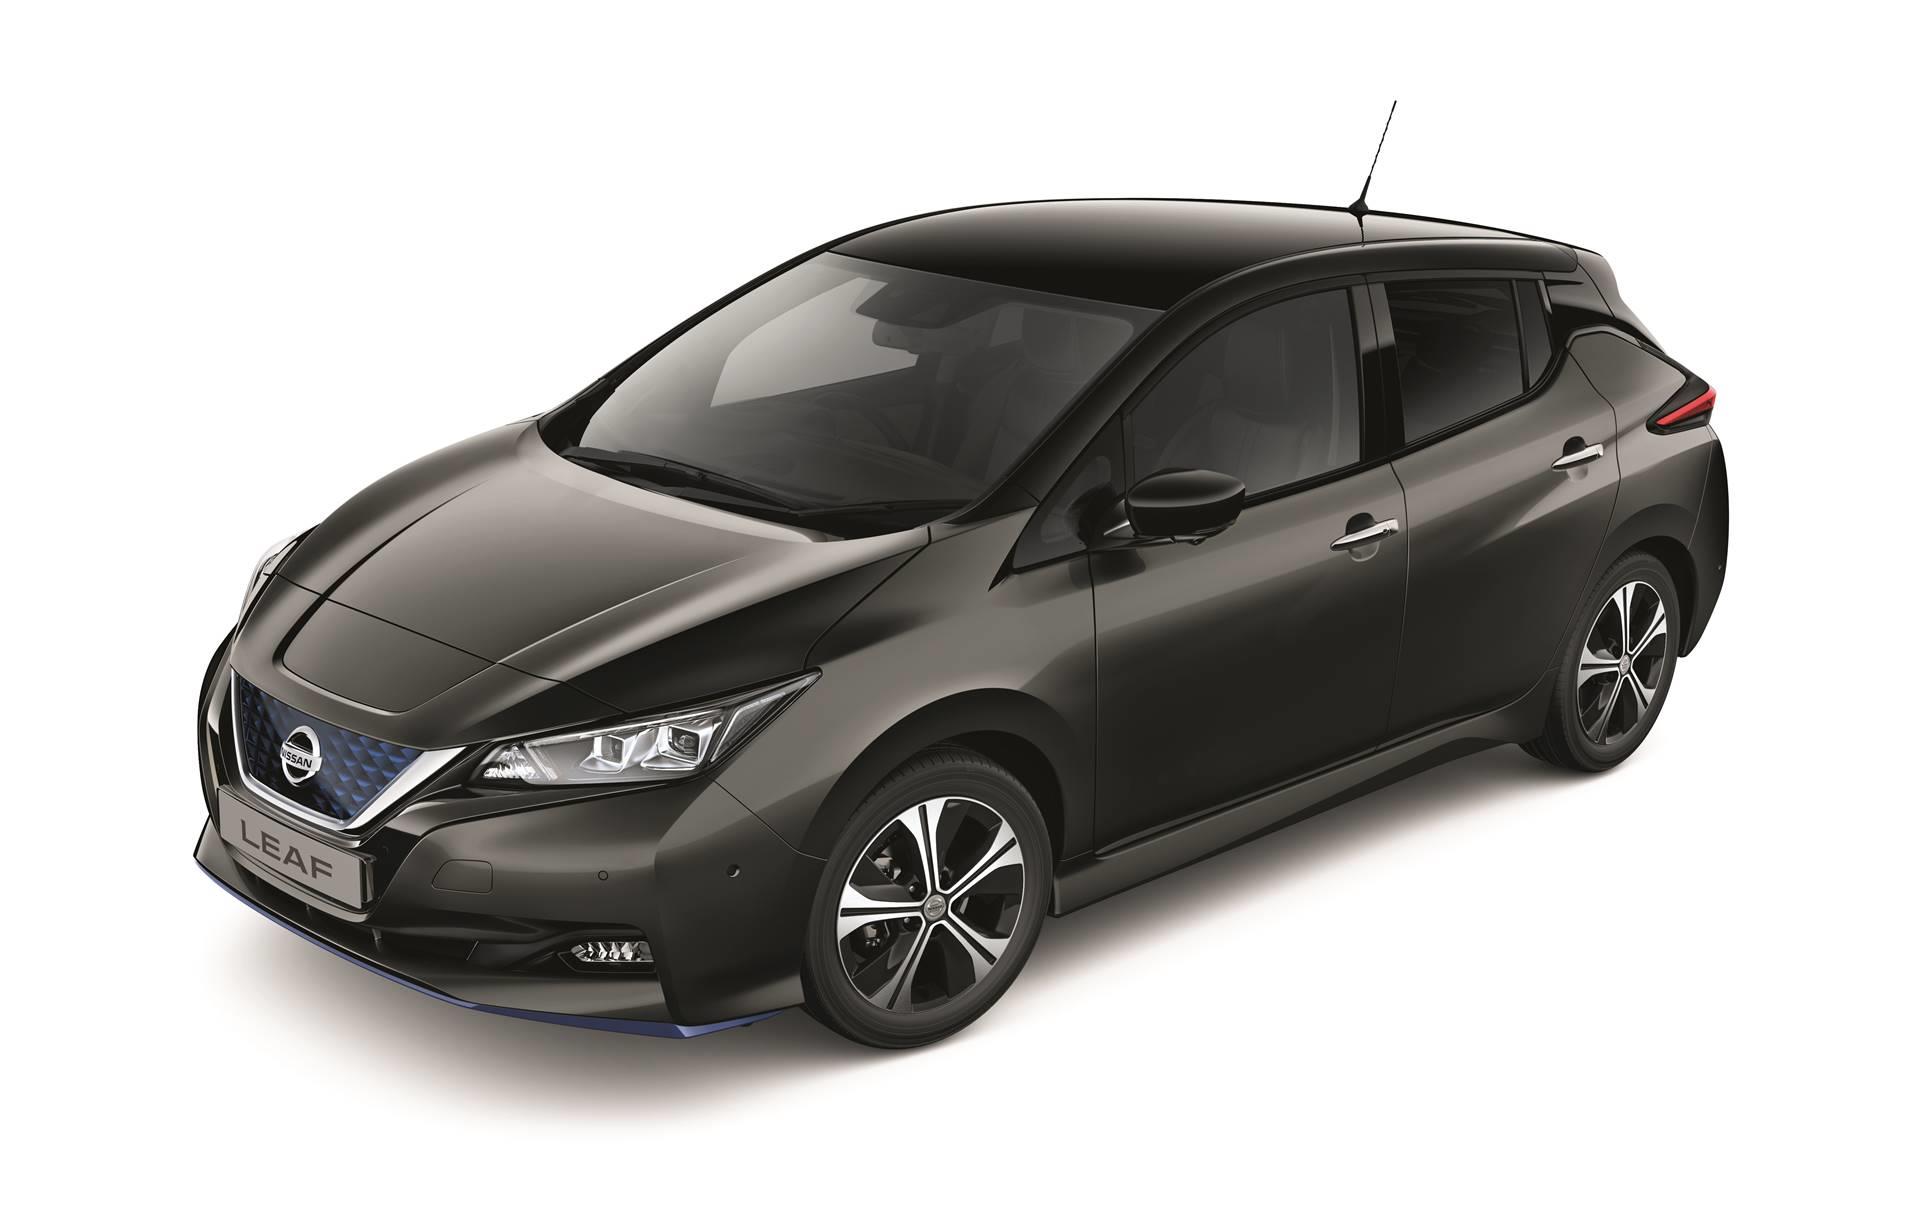 2020 Nissan LEAF e+ NTEC Limited Edition News and Information